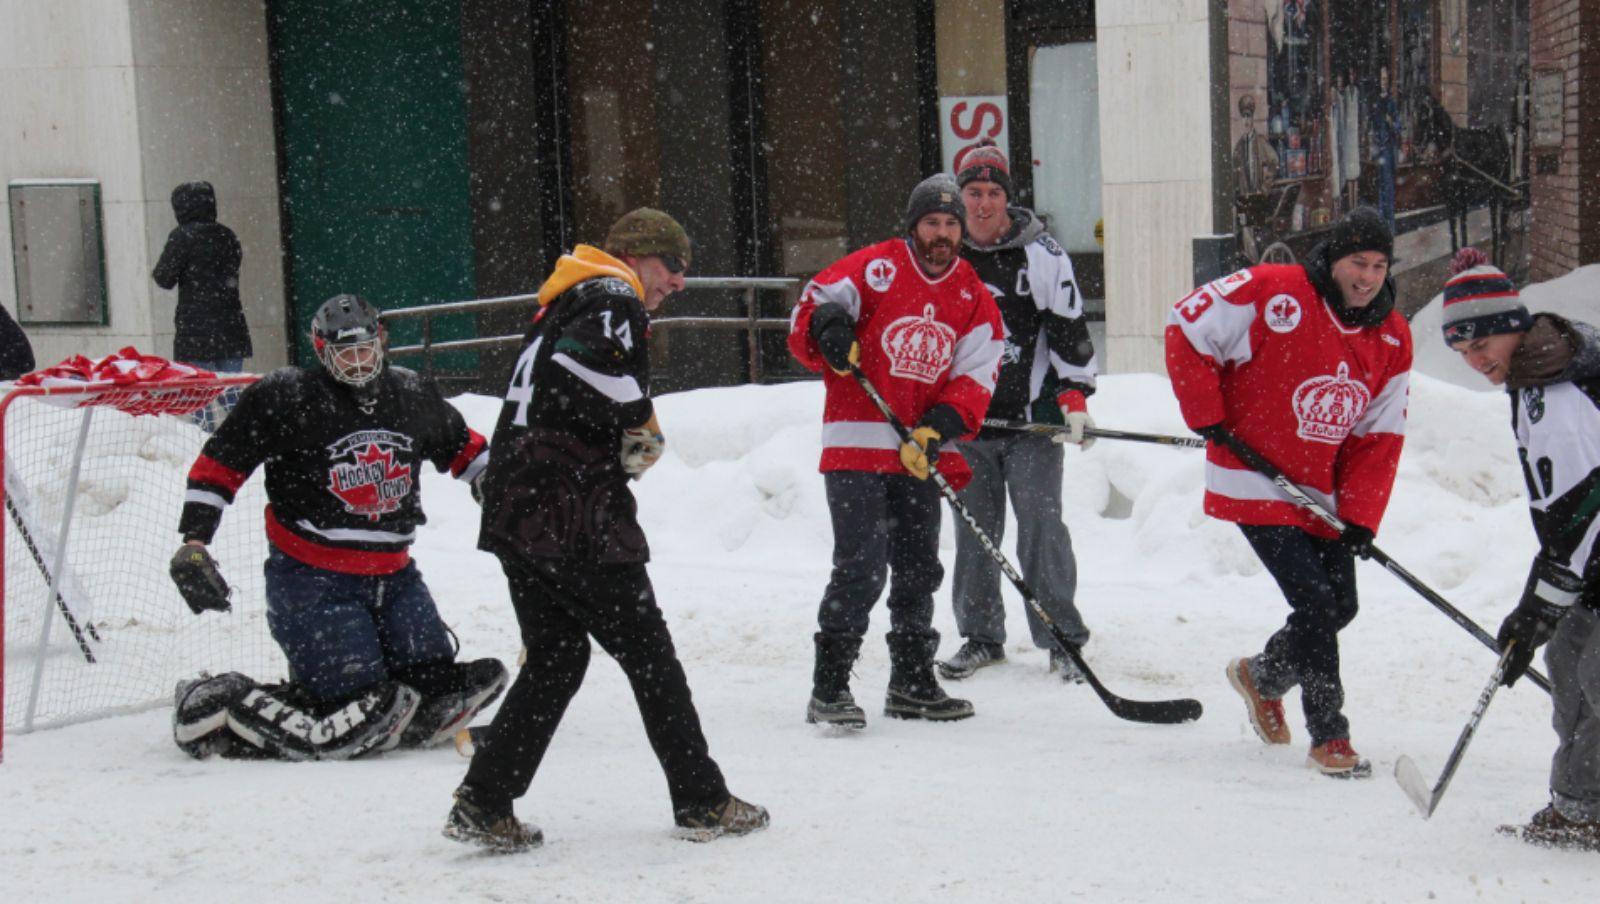 A group of men playing road hockey in the winter.